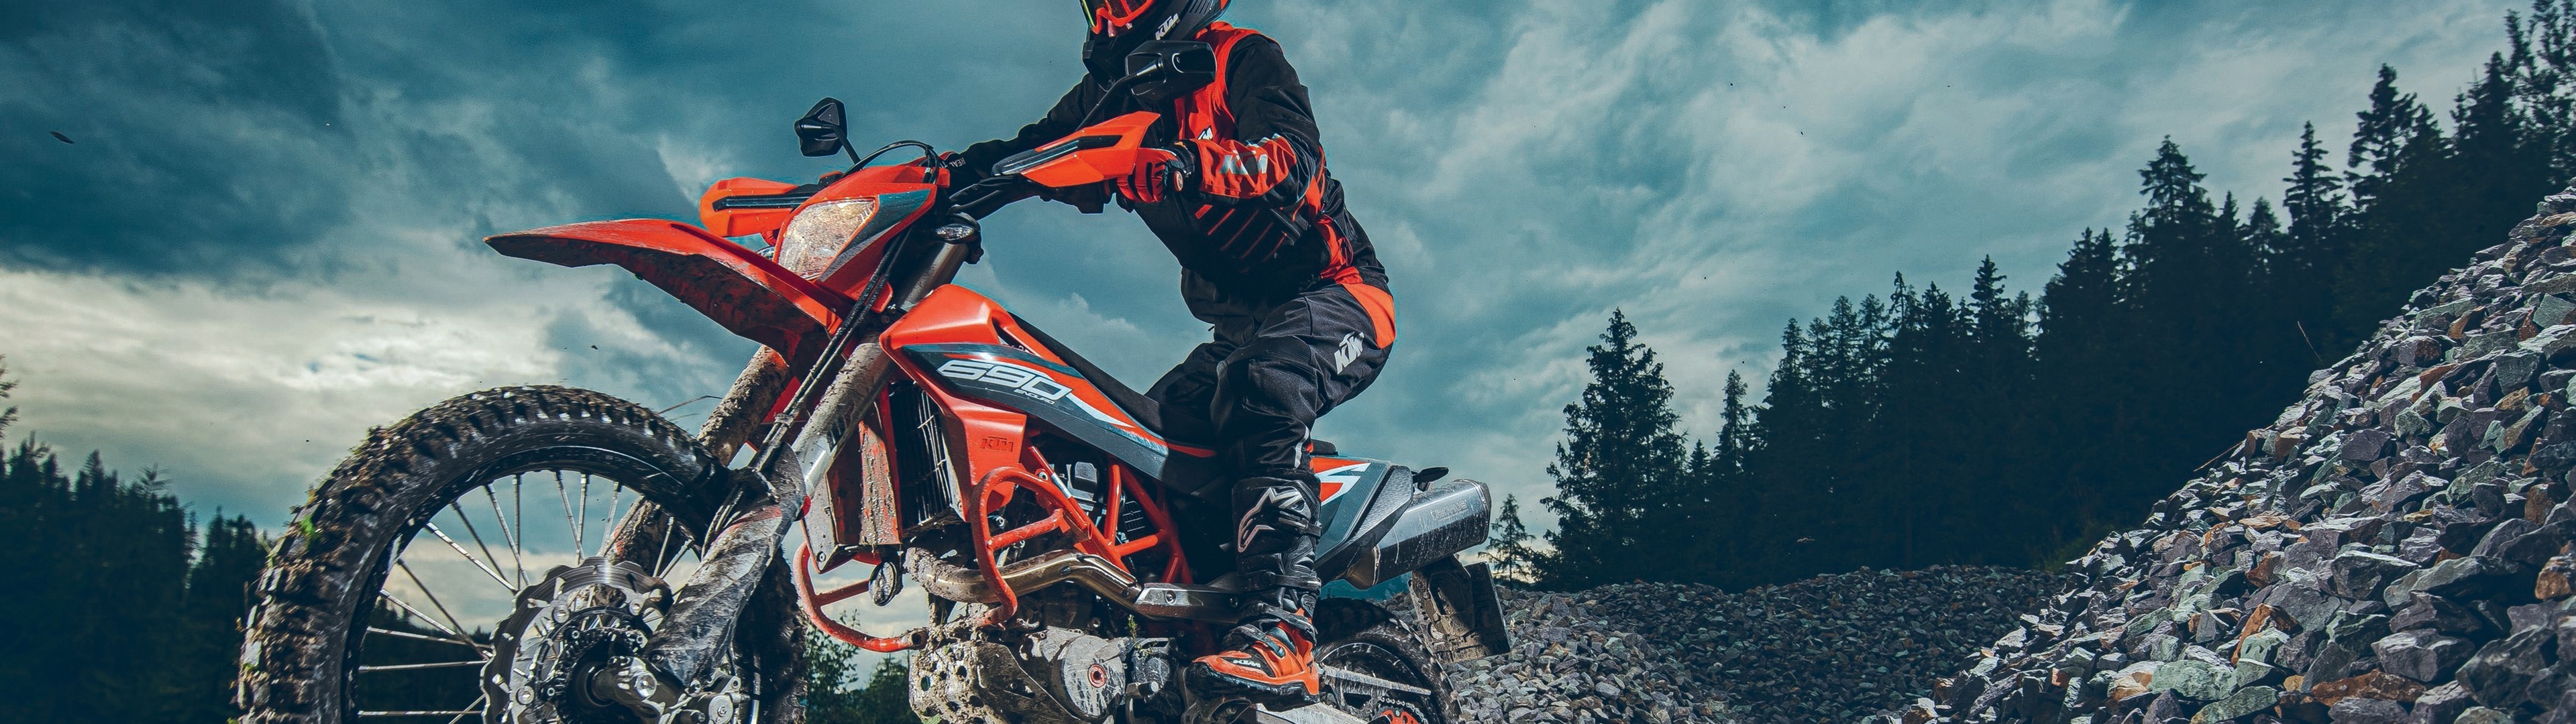 Enduro Motorbike: KTM 690, Track In The Highlands, Powerful Motor, Durable Tires, Motorcycling. 3840x1080 Dual Screen Background.